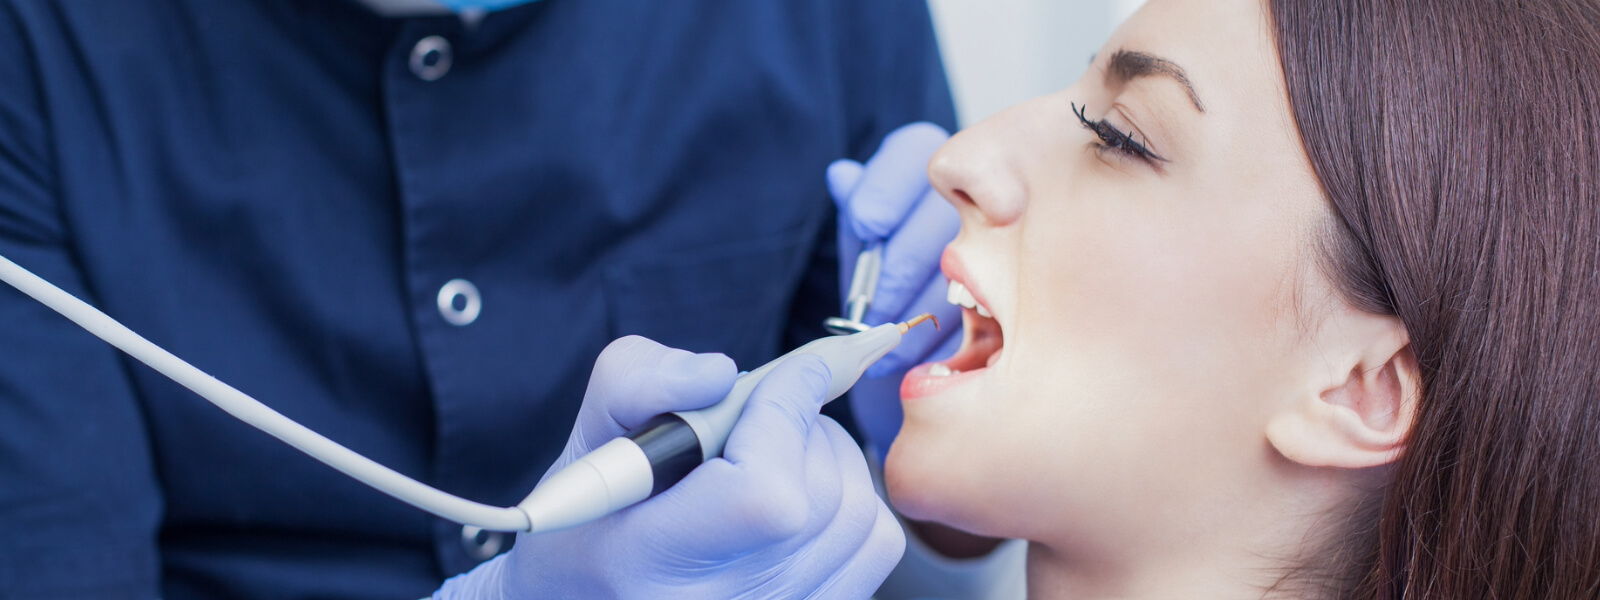 Professional Teeth Cleaning in Glendale CA area